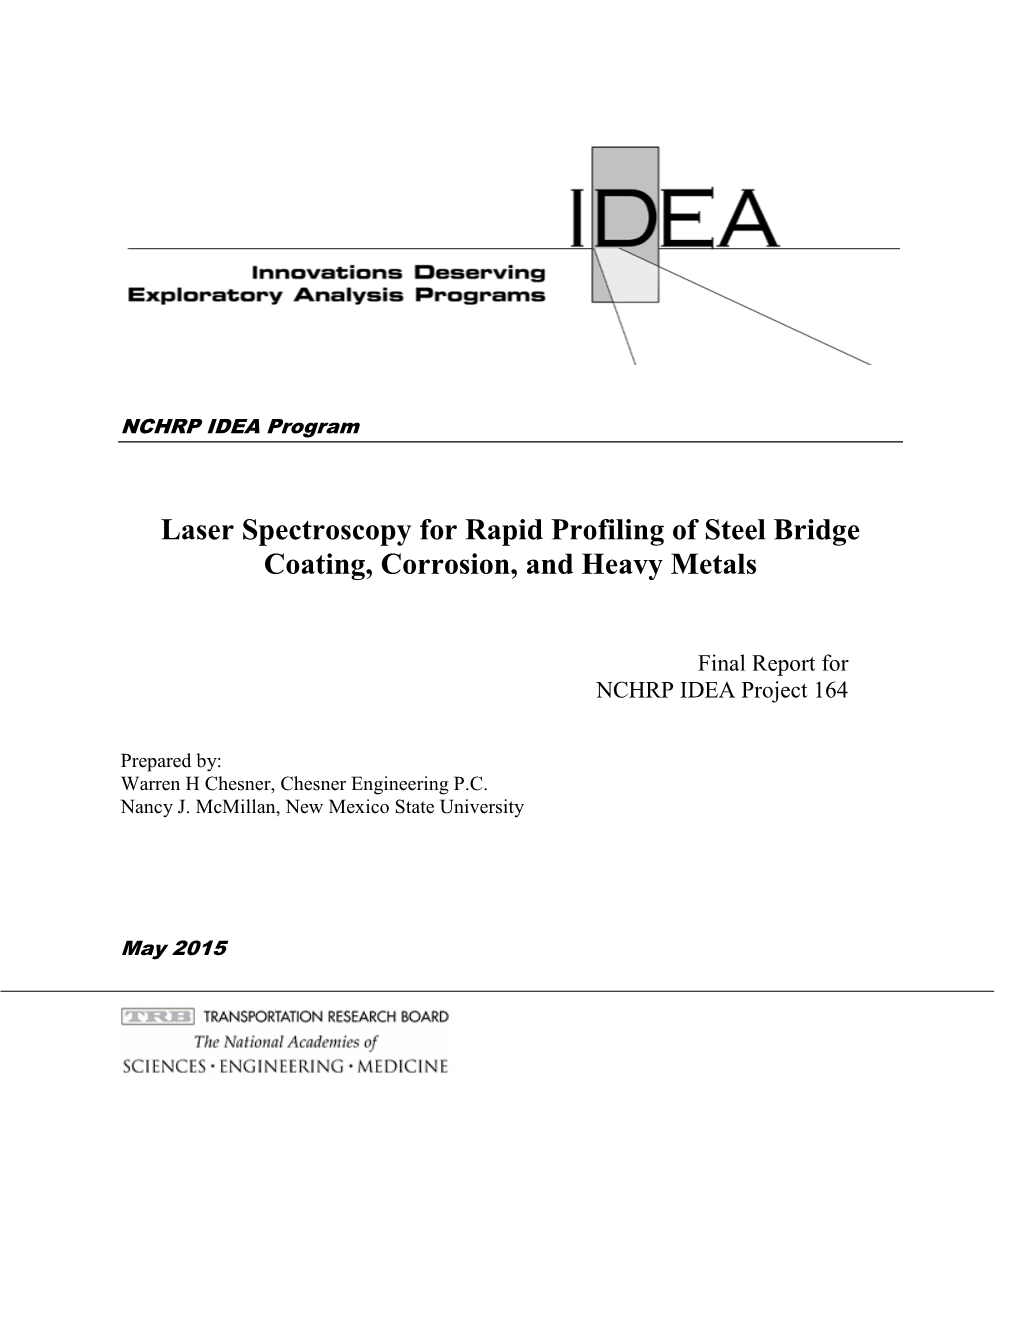 Laser Spectroscopy for Rapid Profiling of Steel Bridge Coating, Corrosion, and Heavy Metals